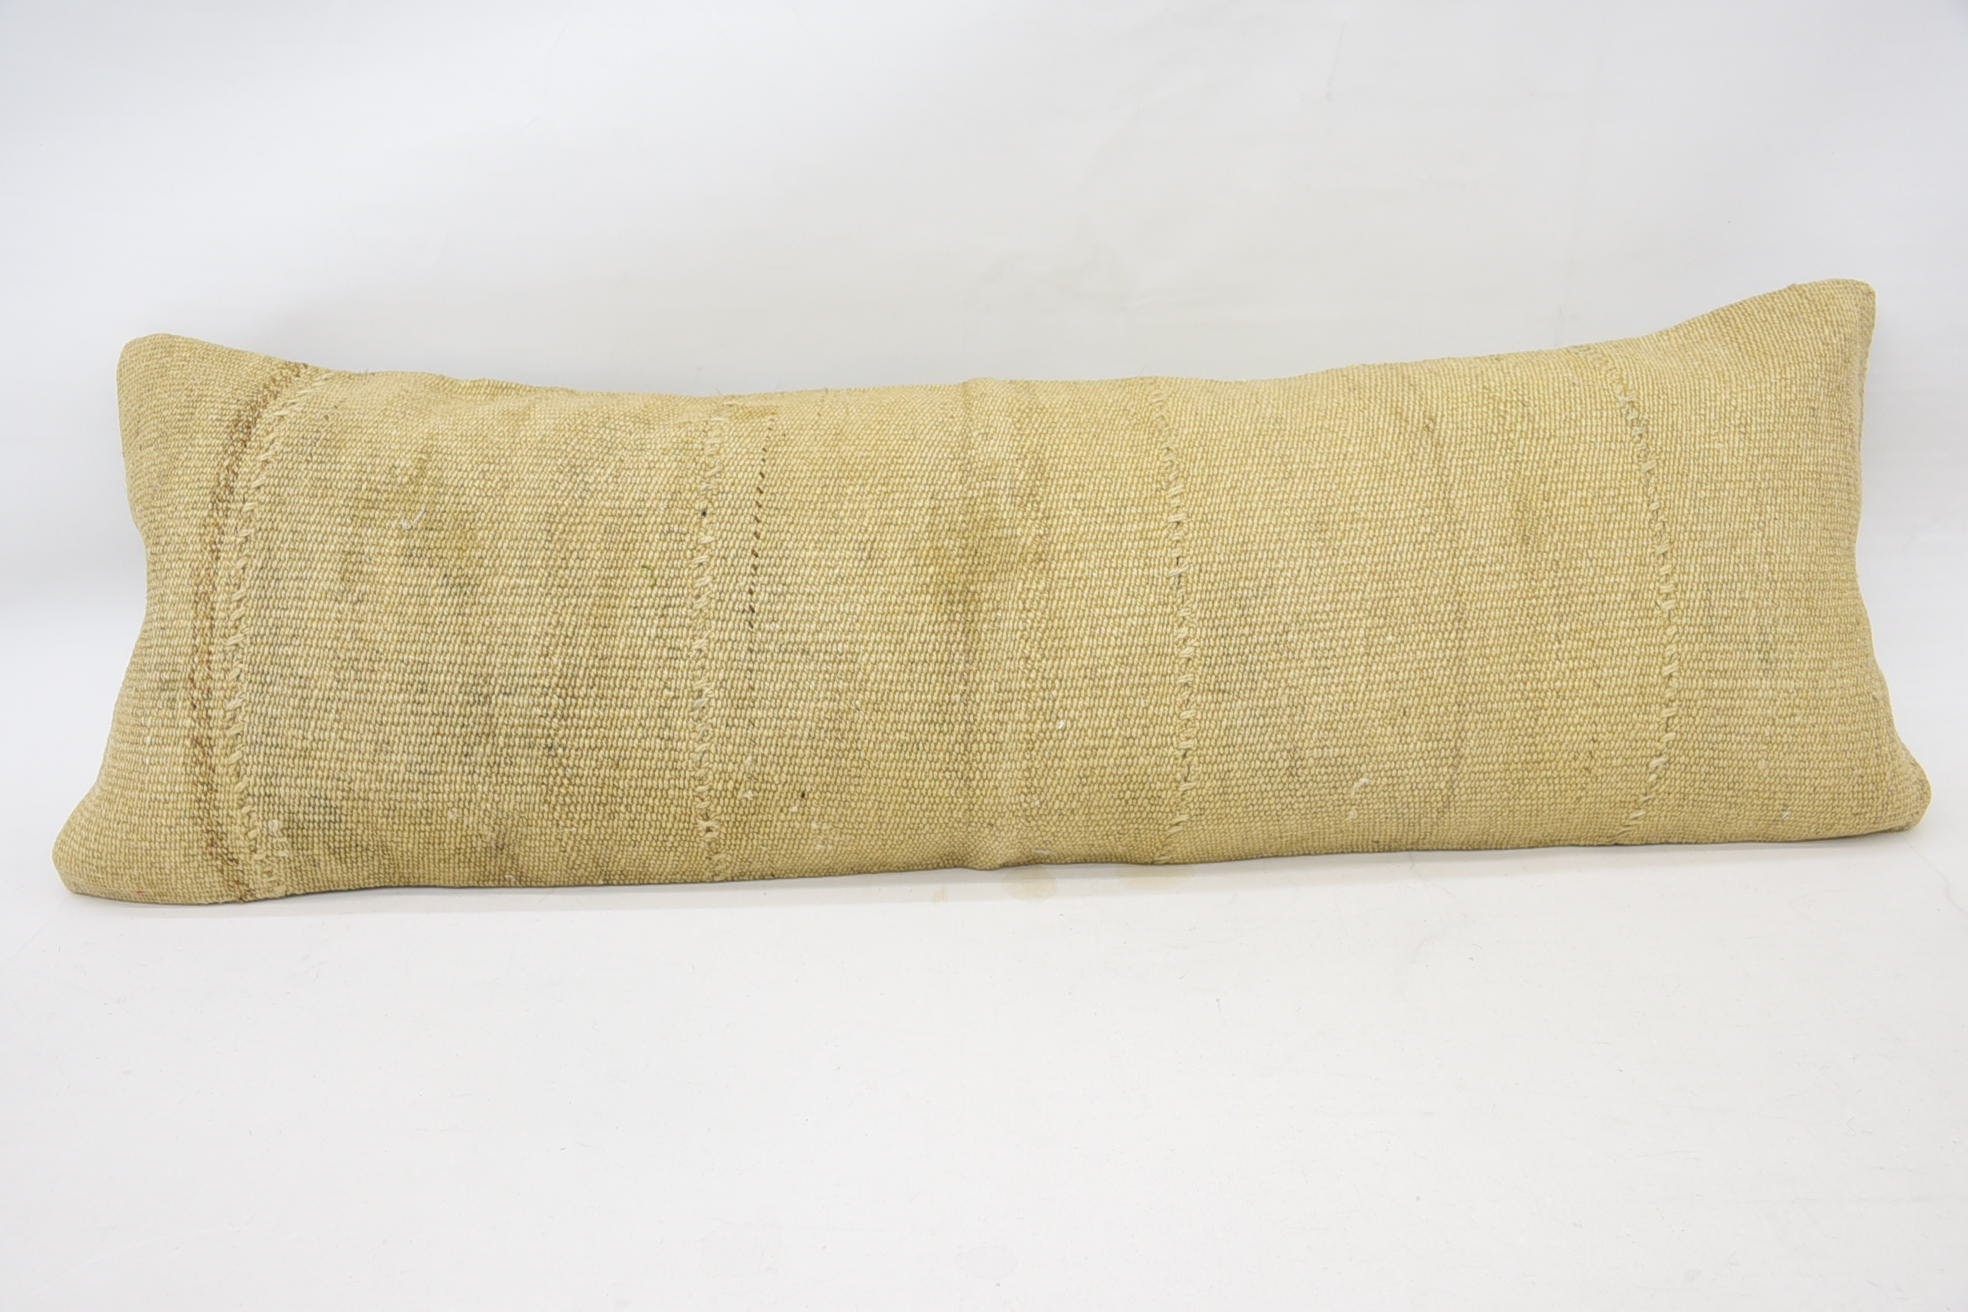 Pillow for Sofa, Vintage Kilim Pillow, Gift Pillow, Turkish Bench Pillow Cover, Floor Cushion Case, 16"x48" Beige Cushion